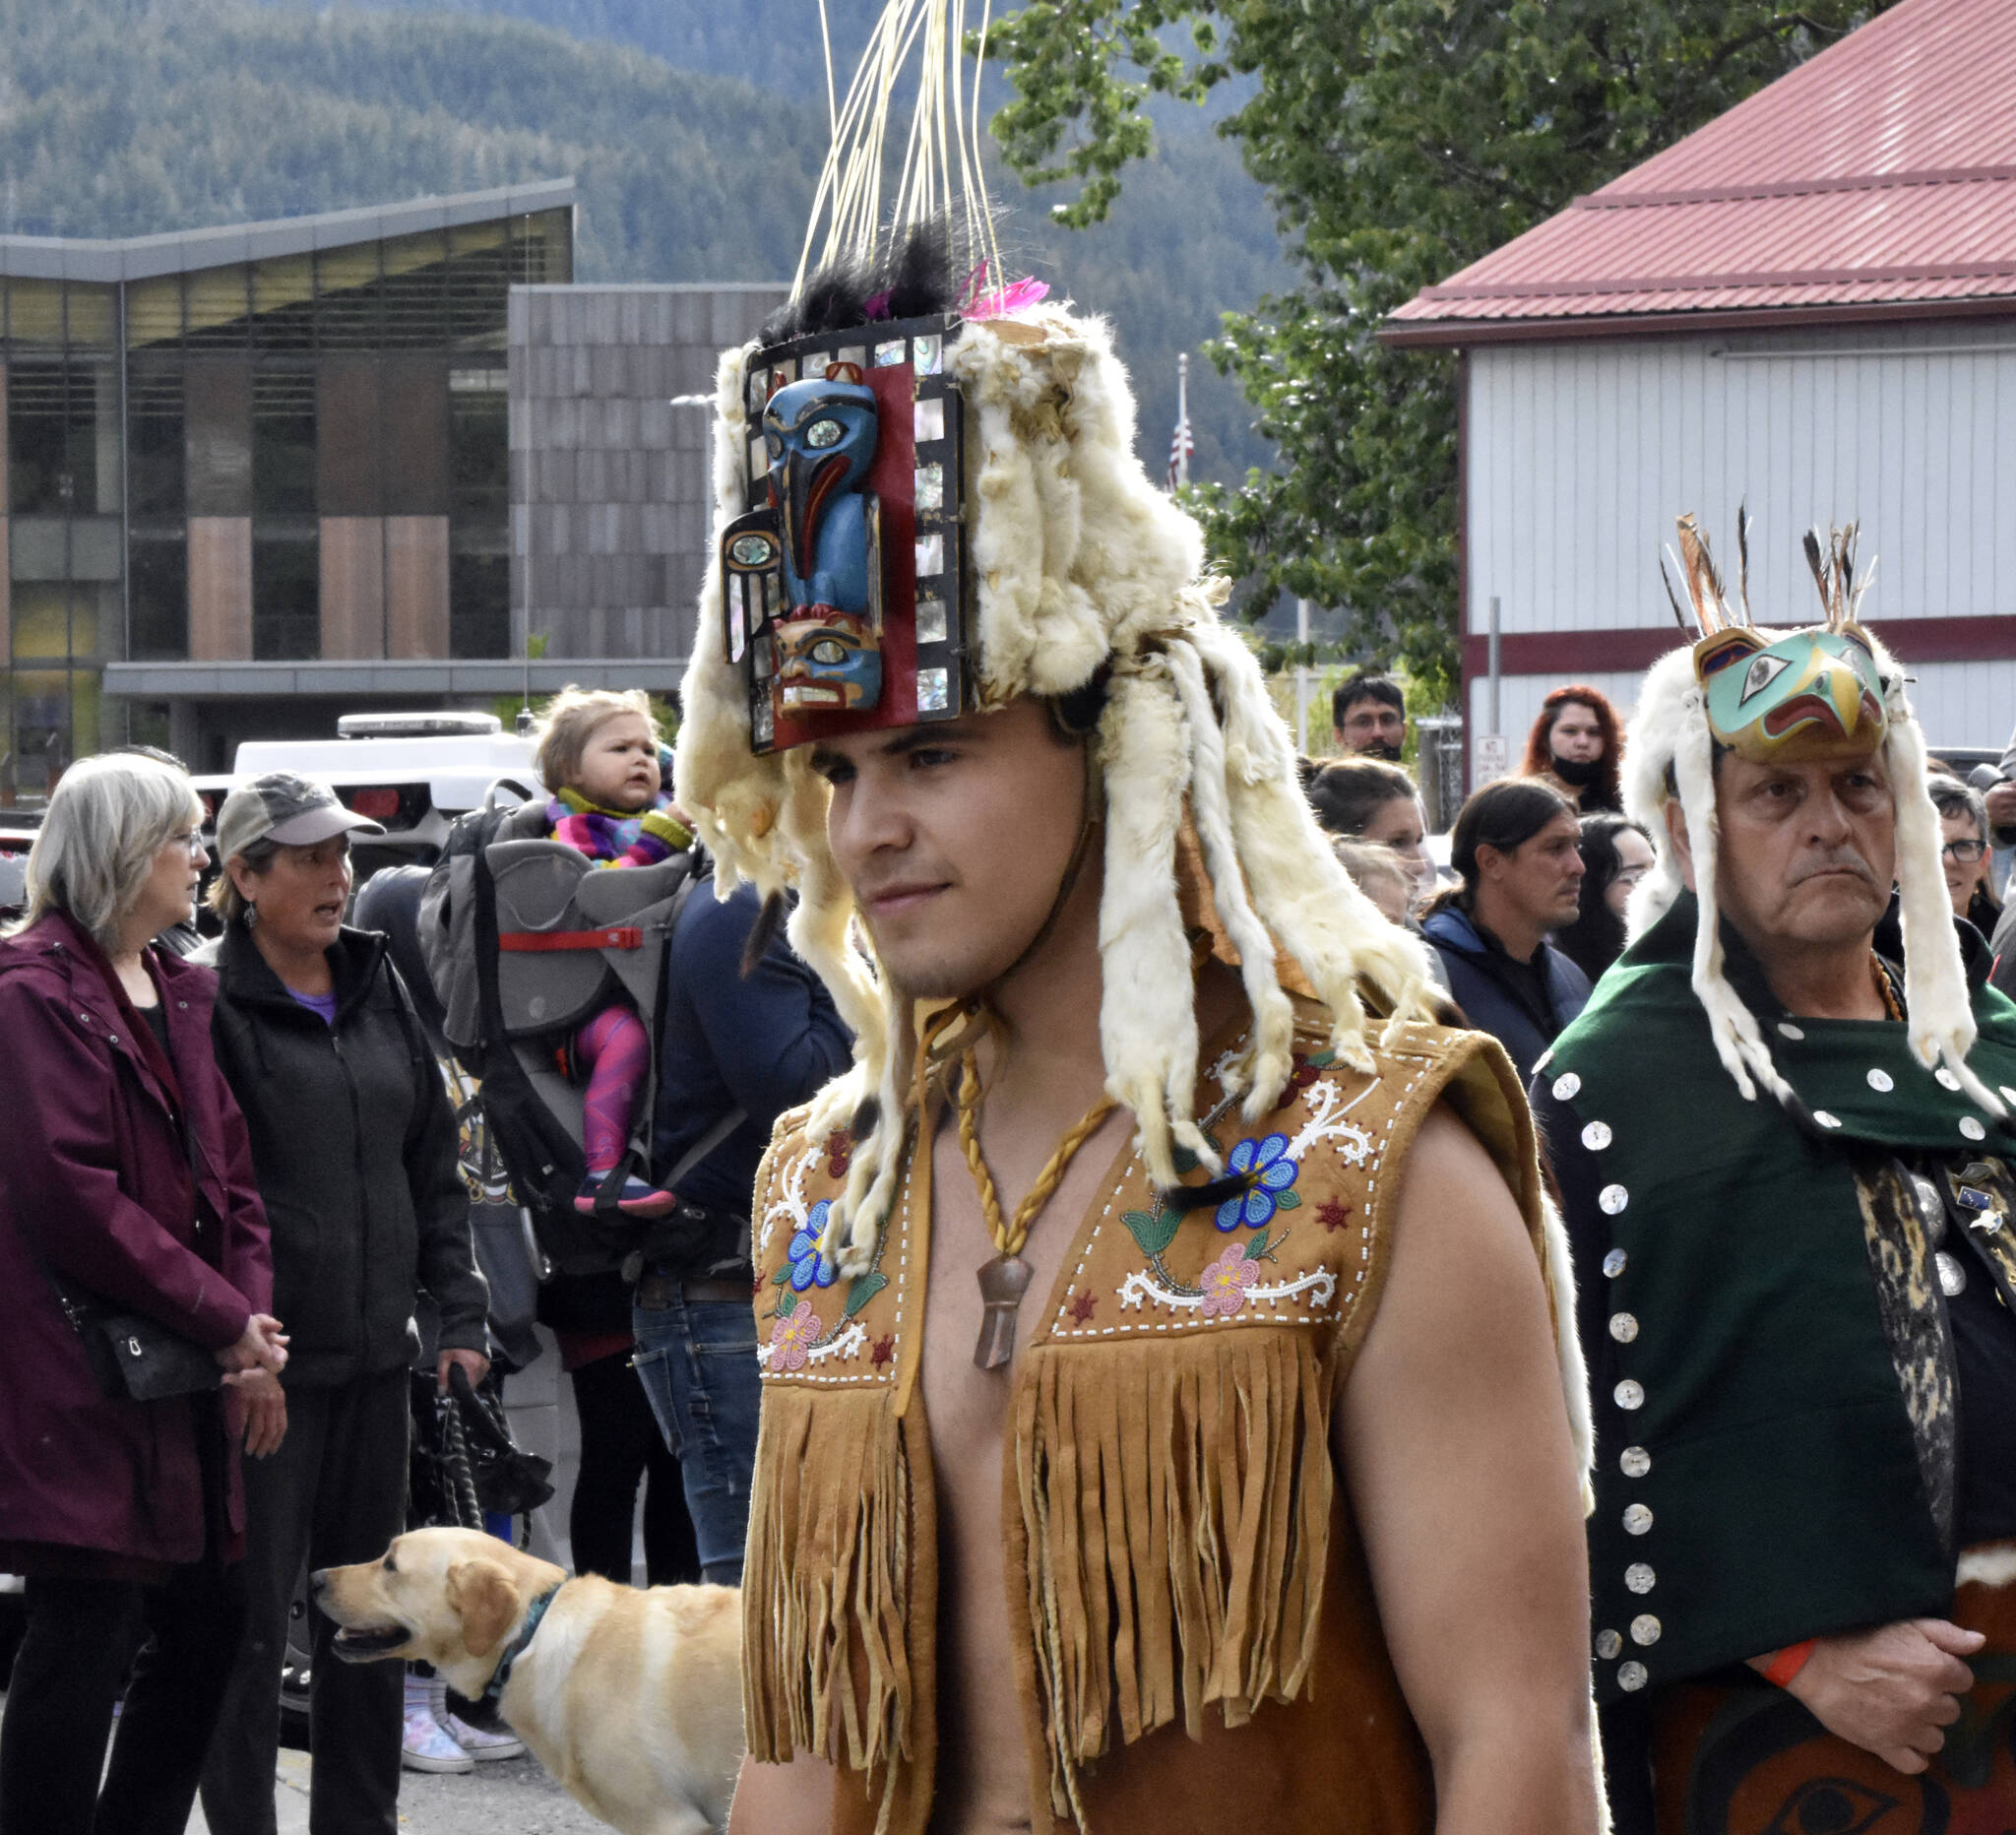 Brandon Gomez, 19, was on Willoughby Avenue in downtown Juneau on Wednesday, June 8, 2022, and said he and his brother, both Tlingits, traveled from Maryland to be at Celebration 2022. (Peter Segall / Juneau Empire)